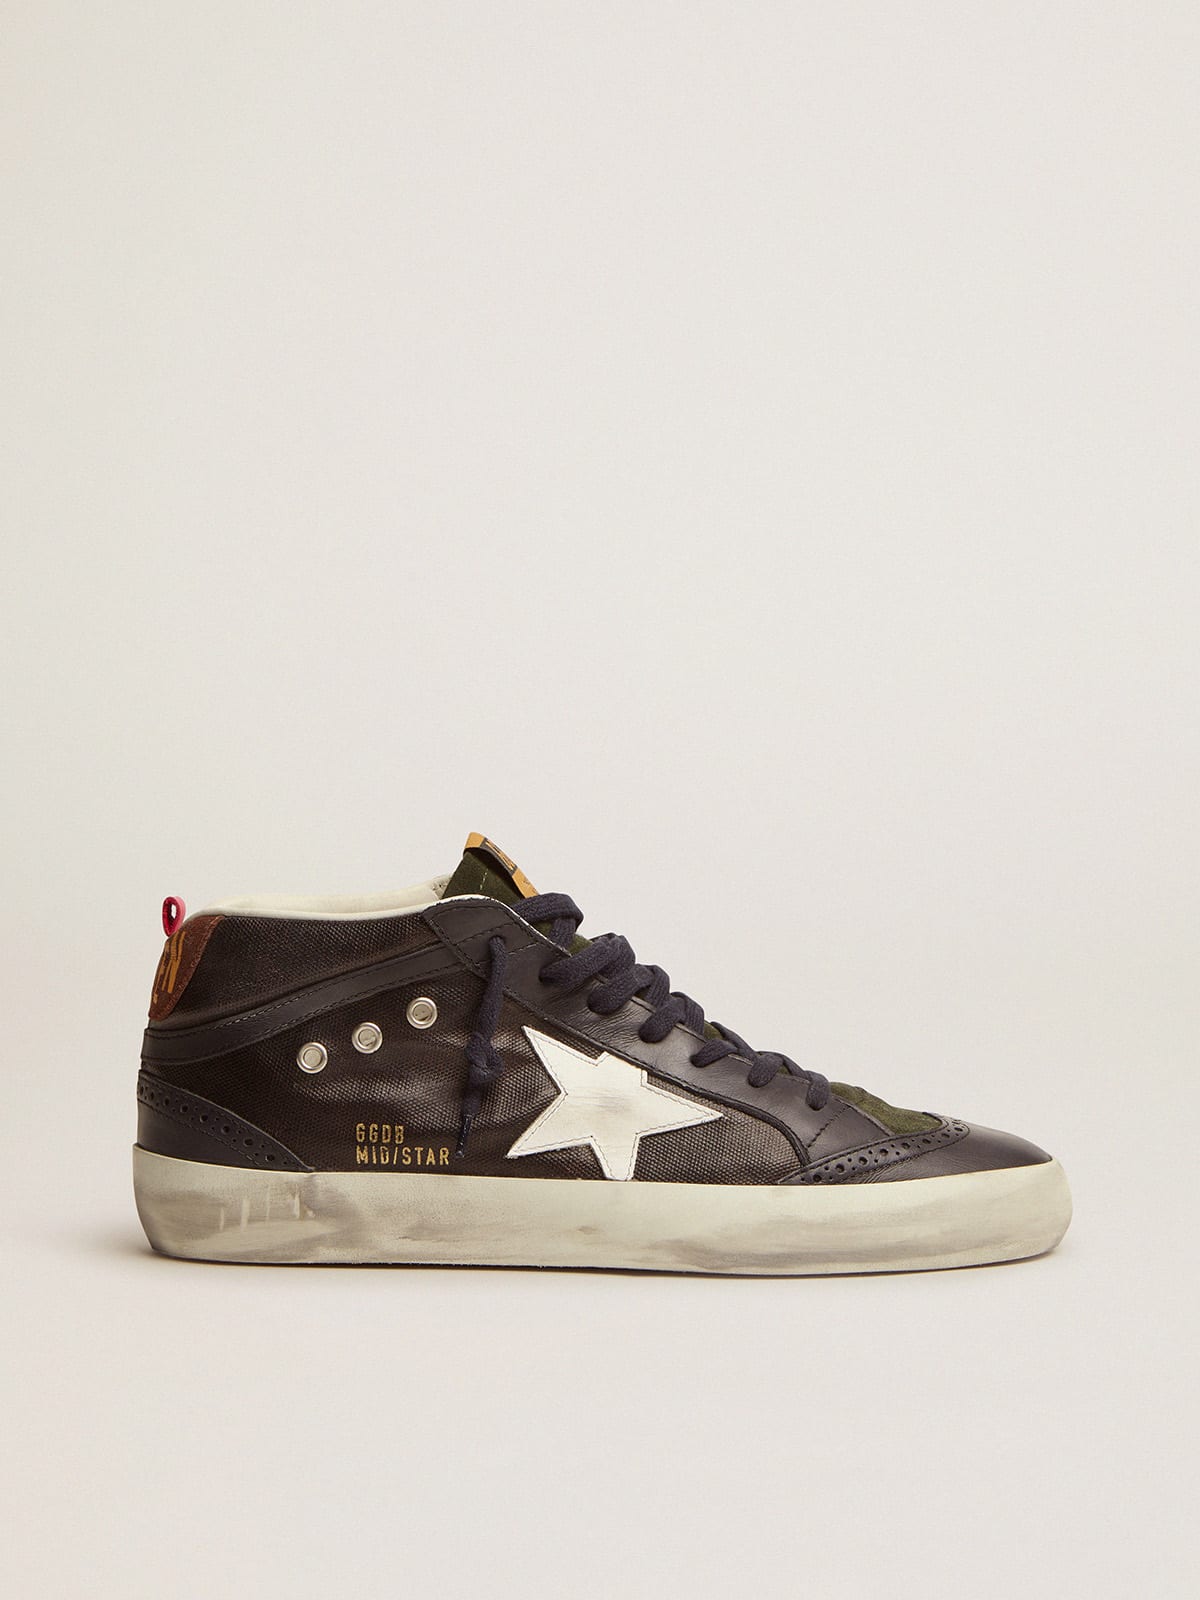 Mid Star sneakers in dark blue canvas with white leather star | Golden Goose